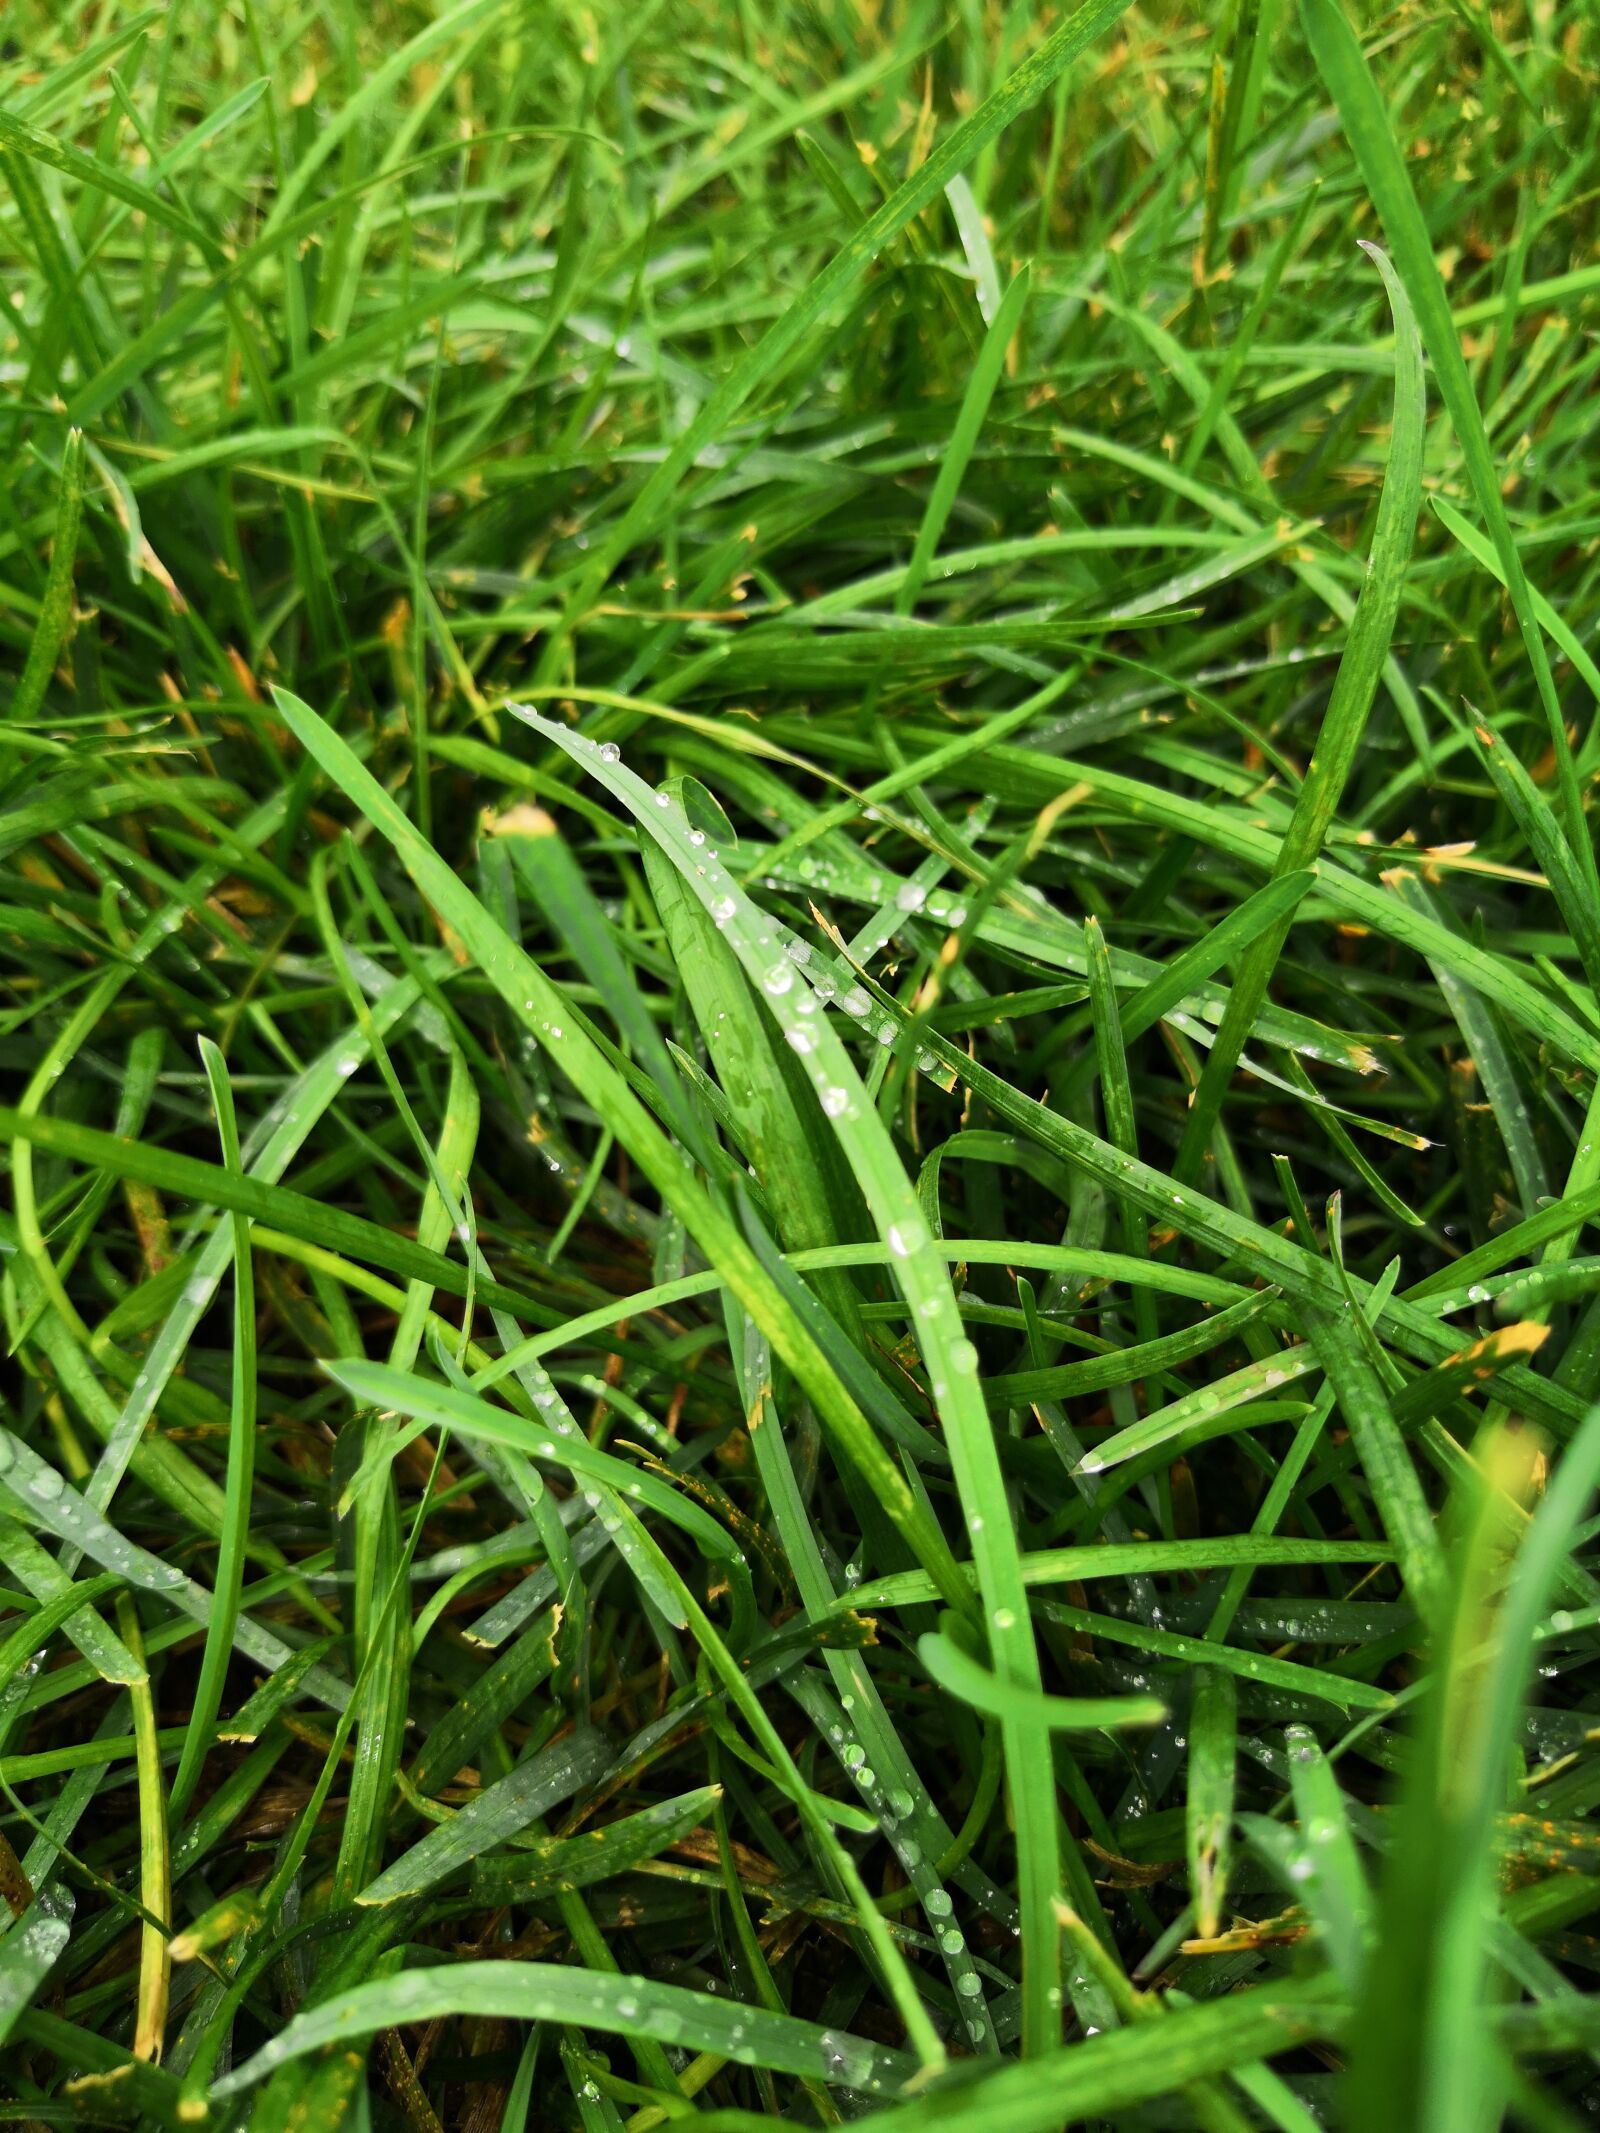 HUAWEI Honor View 10 sample photo. Grass, dew, nature photography